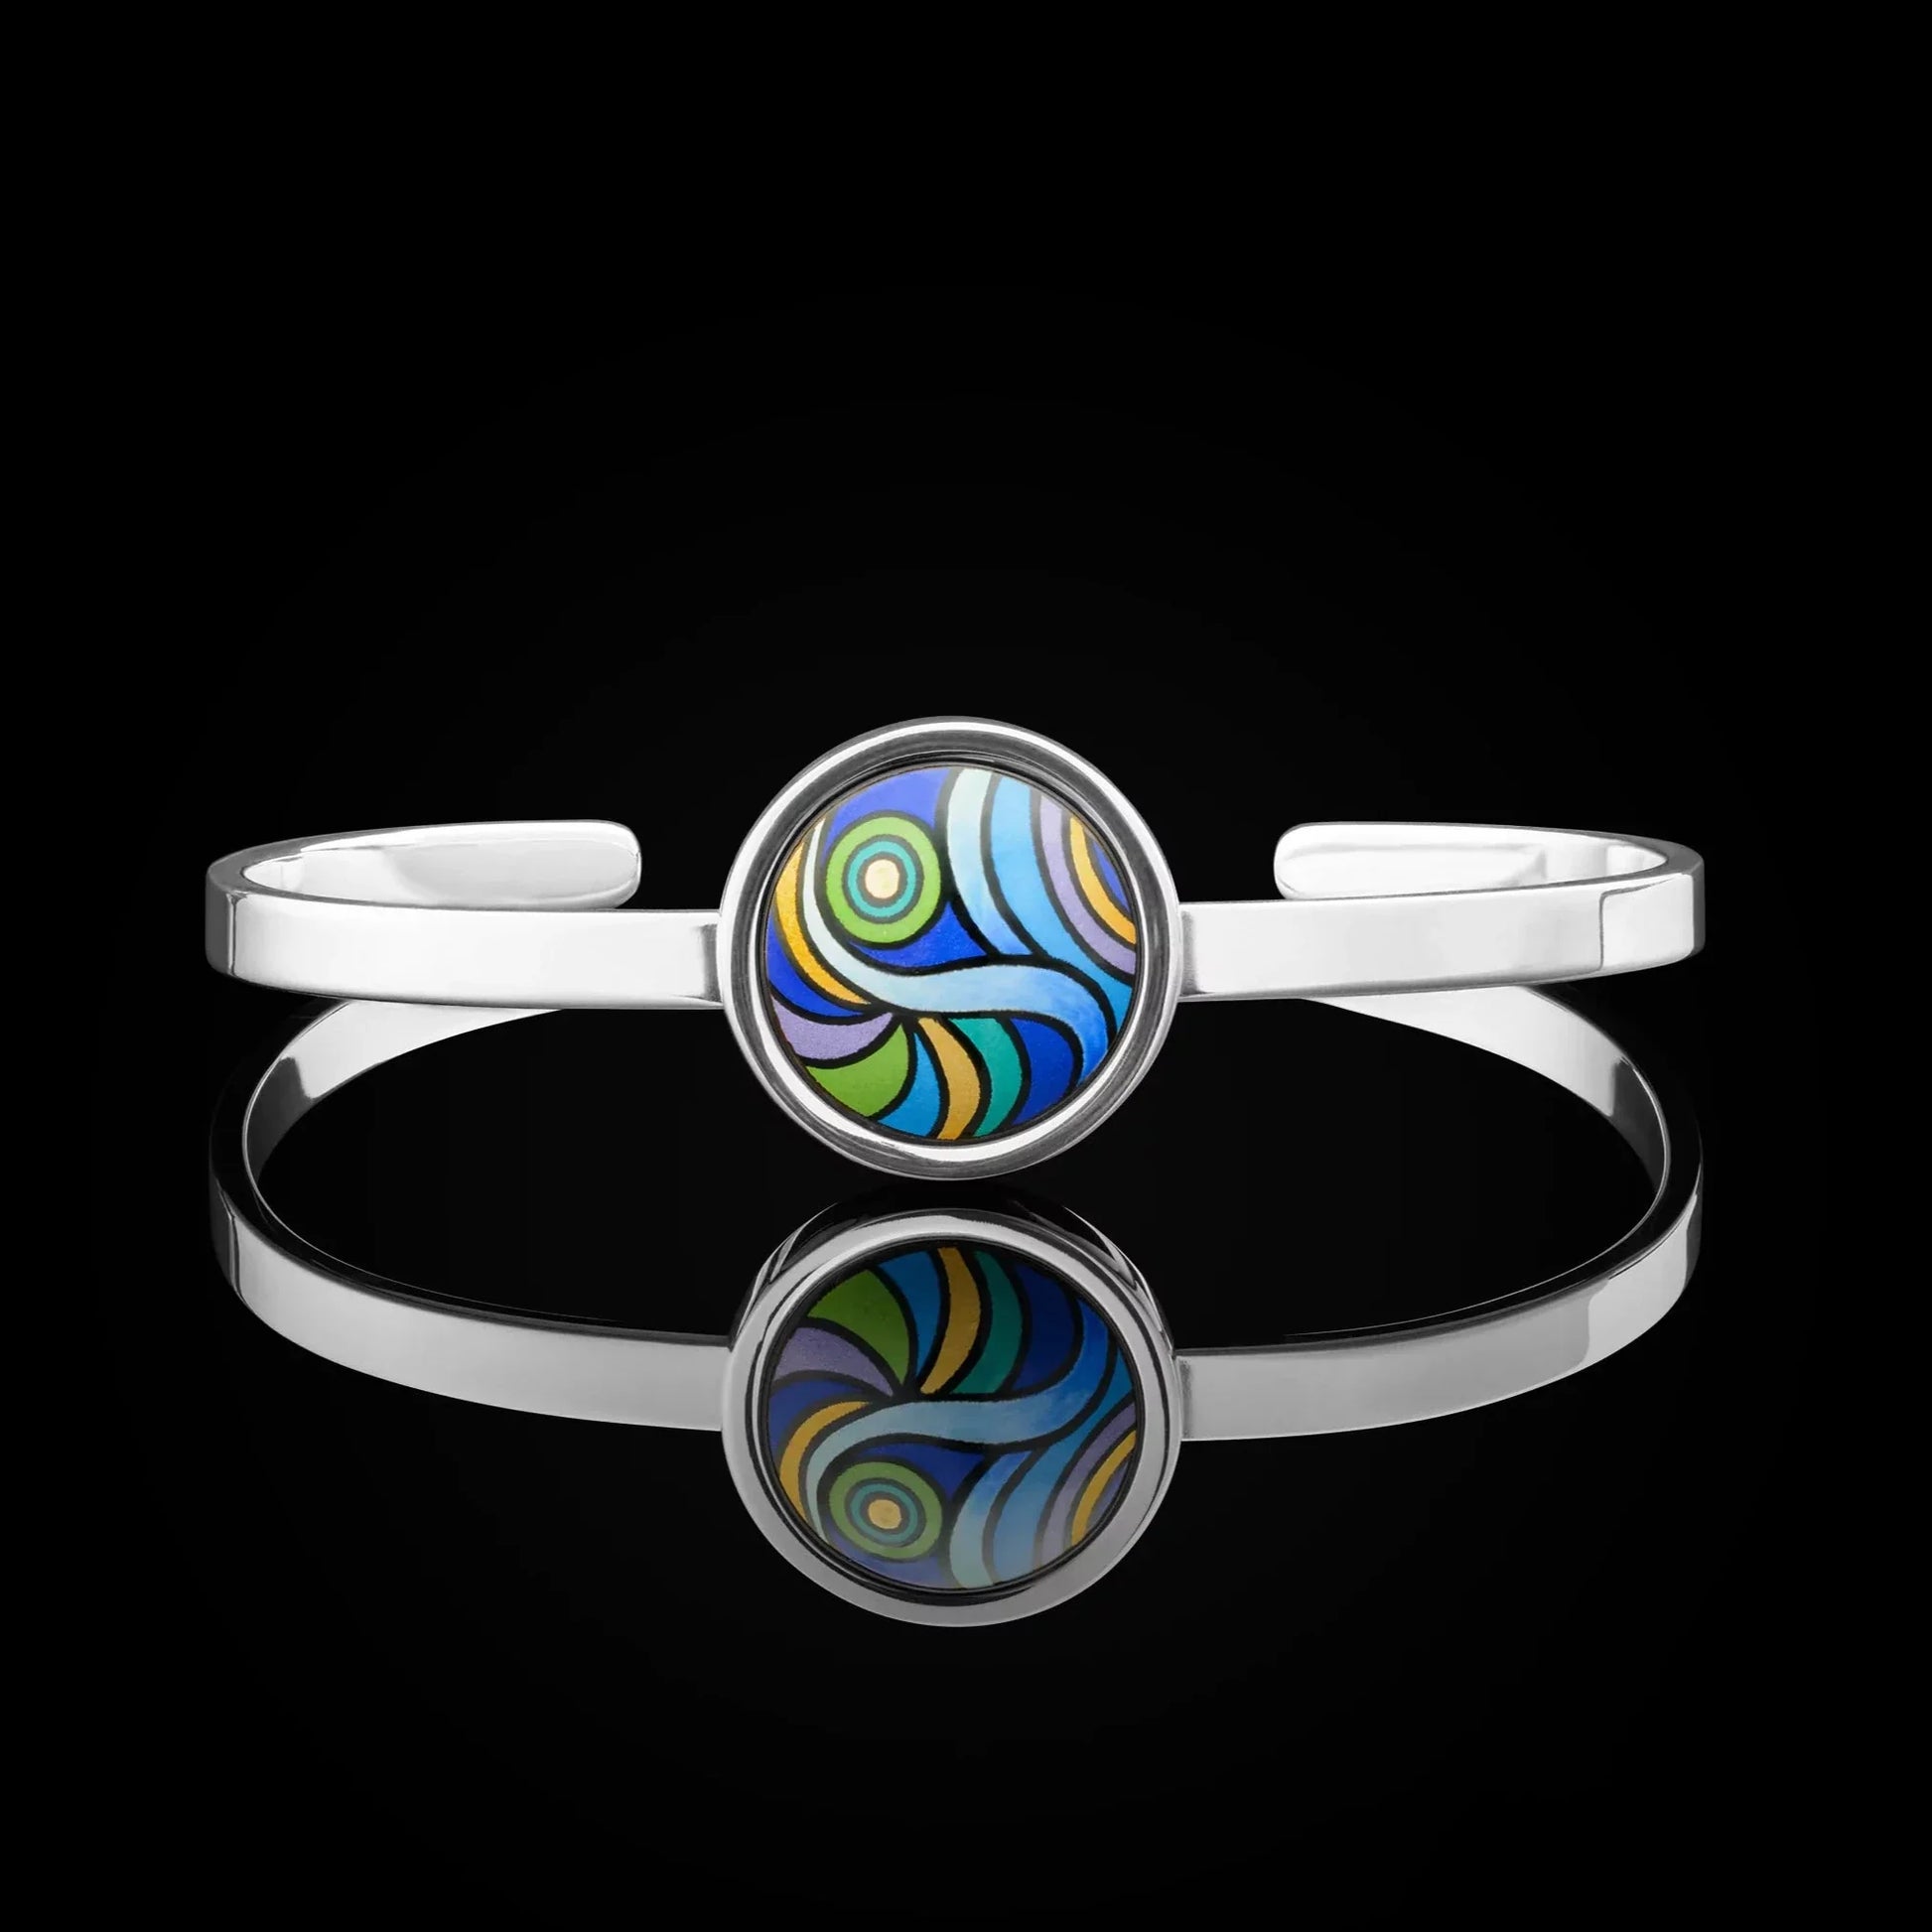 White gold bracelet with a round painting of Van Gogh's "Starry Night" in a center